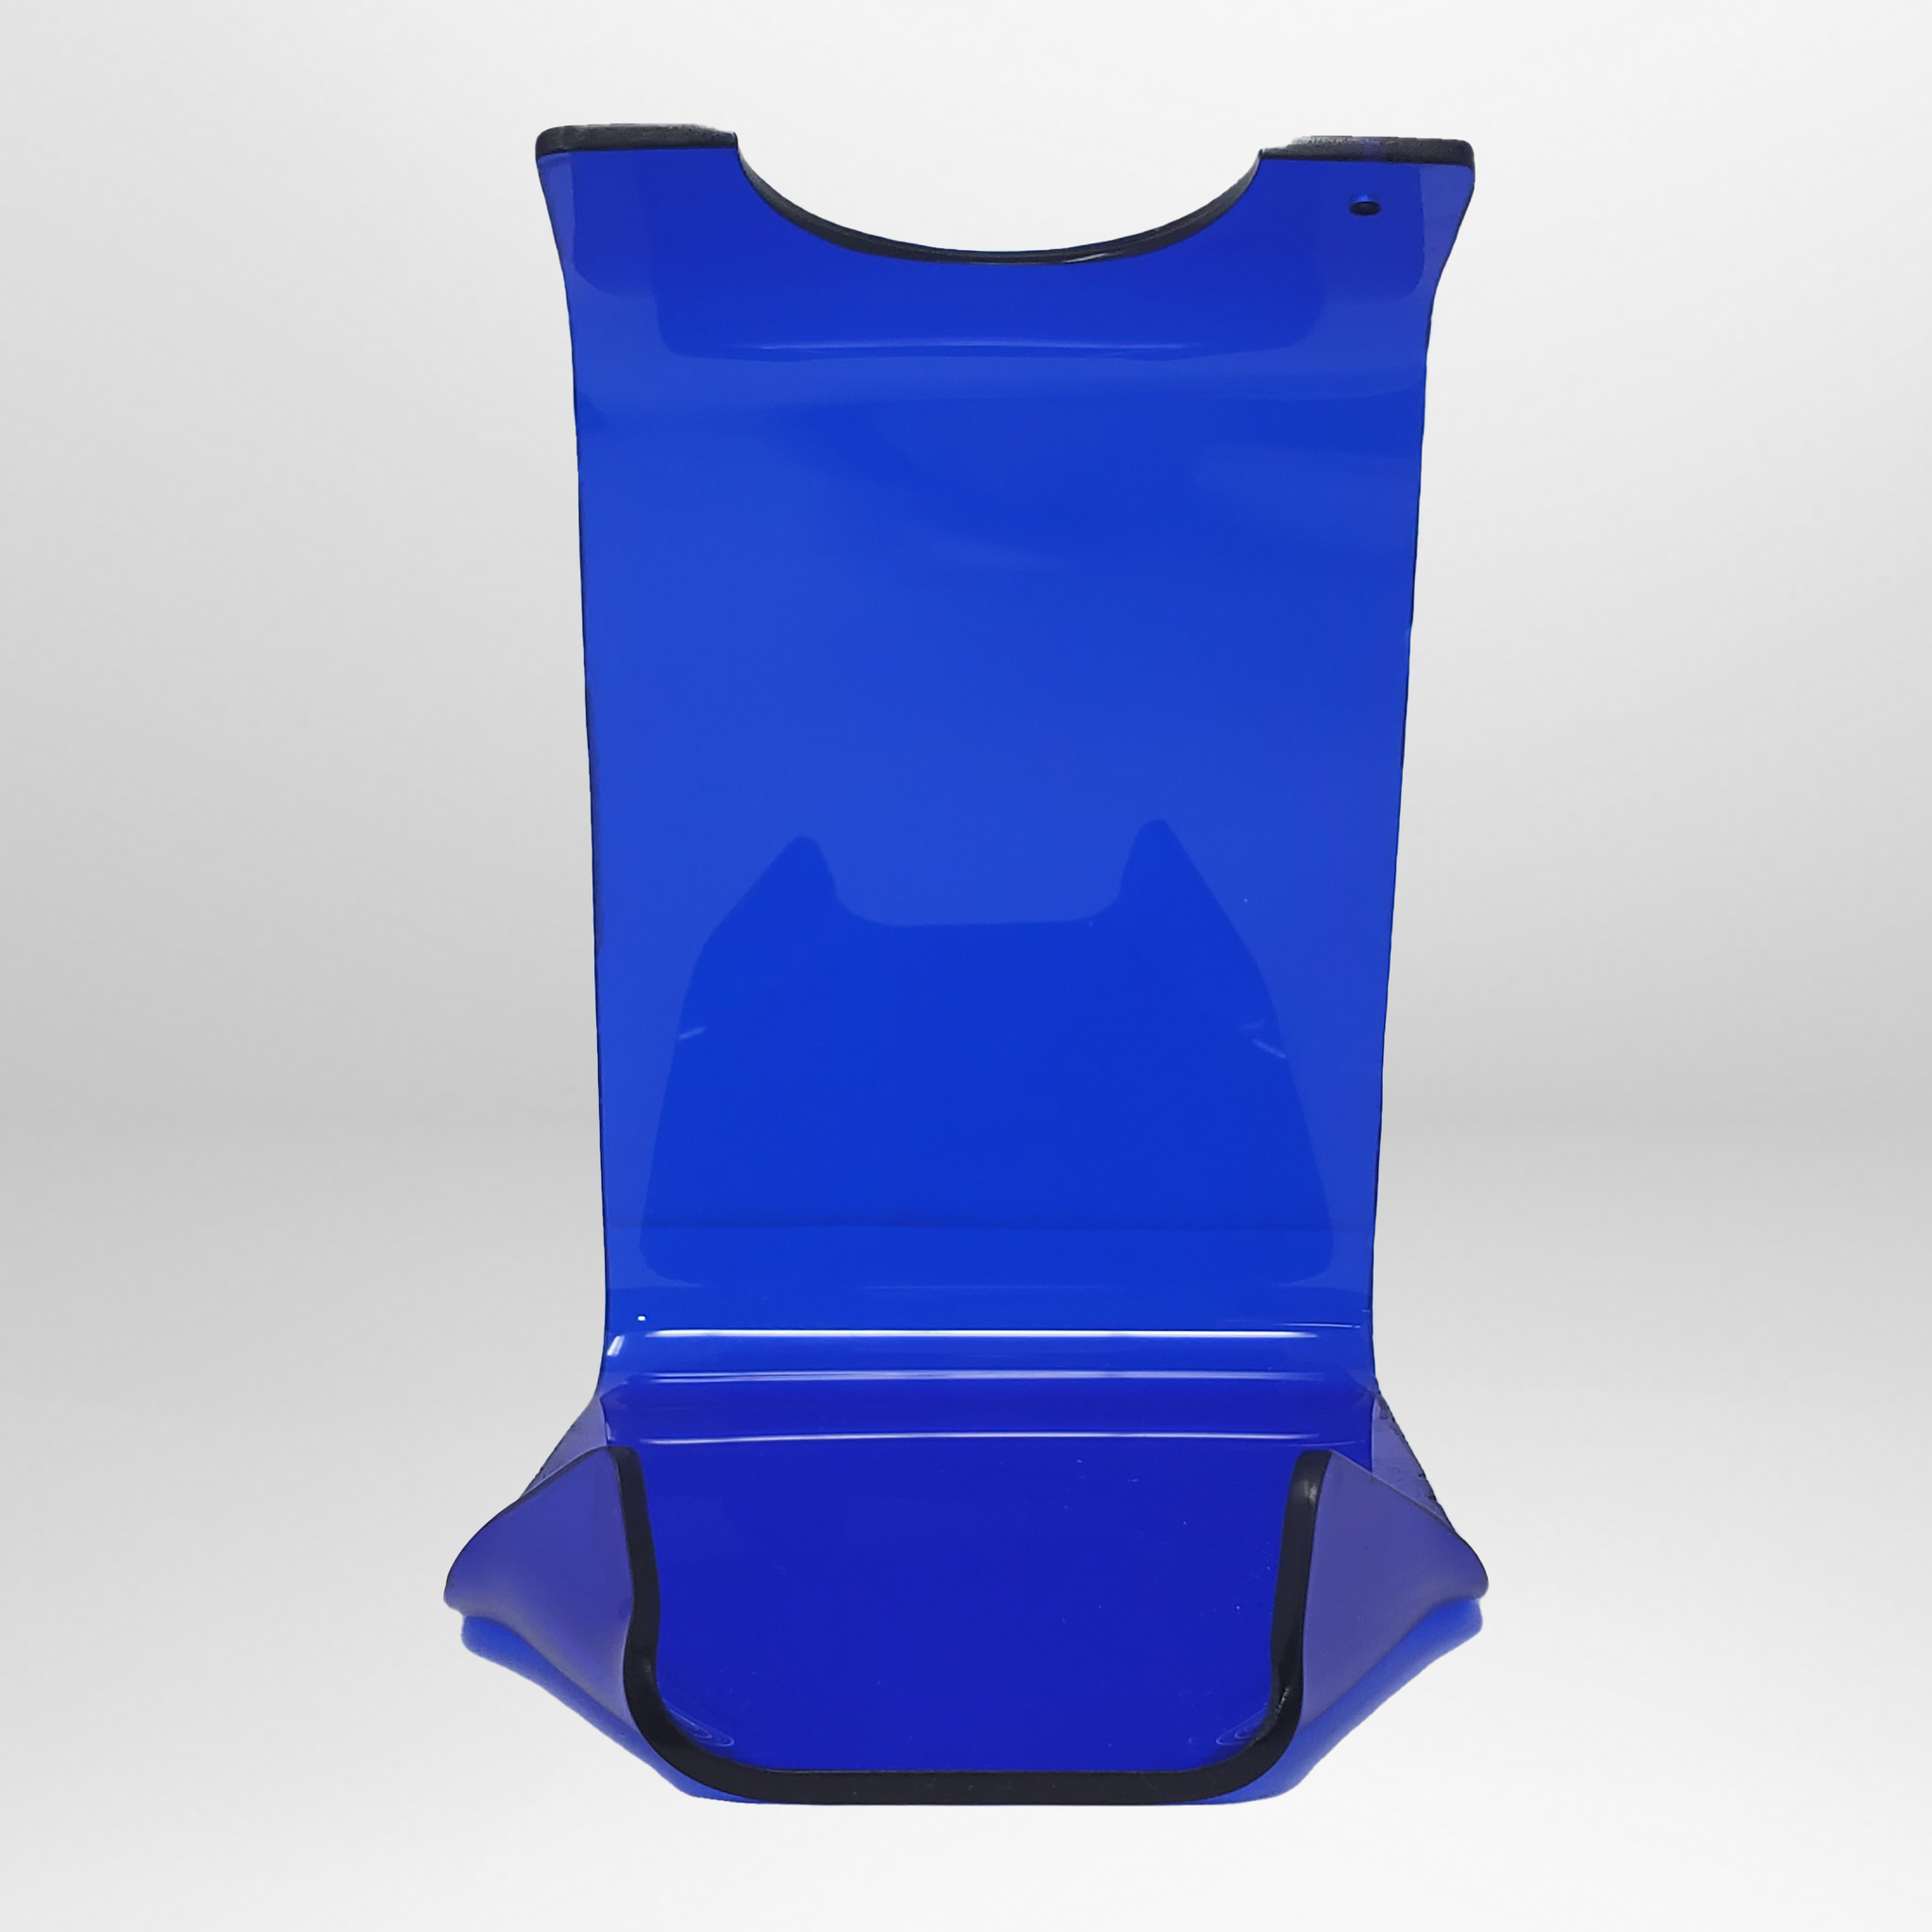 Tobacco Master's blue acrylic stand facing forward.